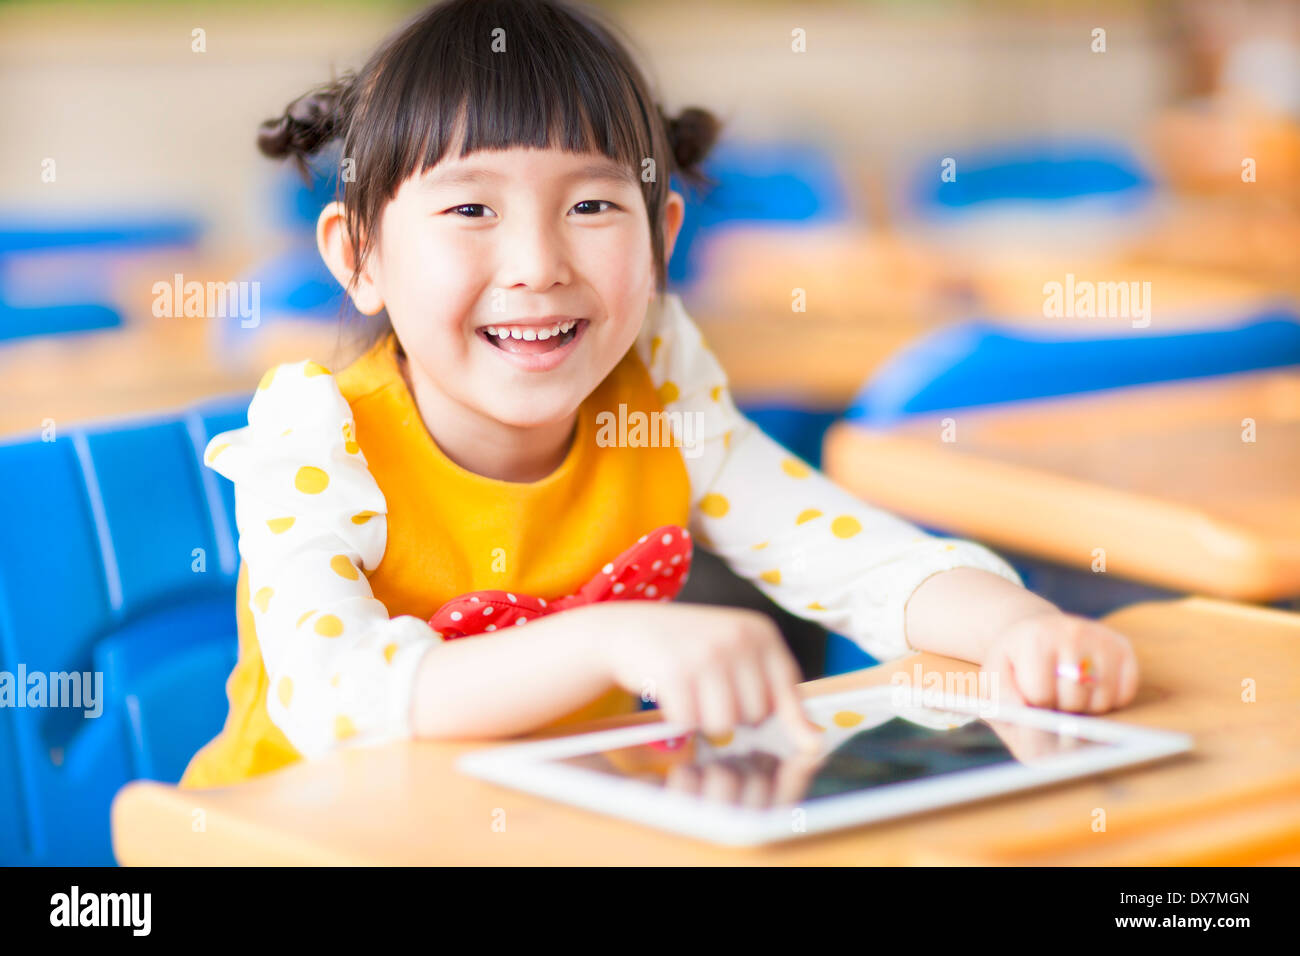 smiling kid using tablet or ipad Stock Photo